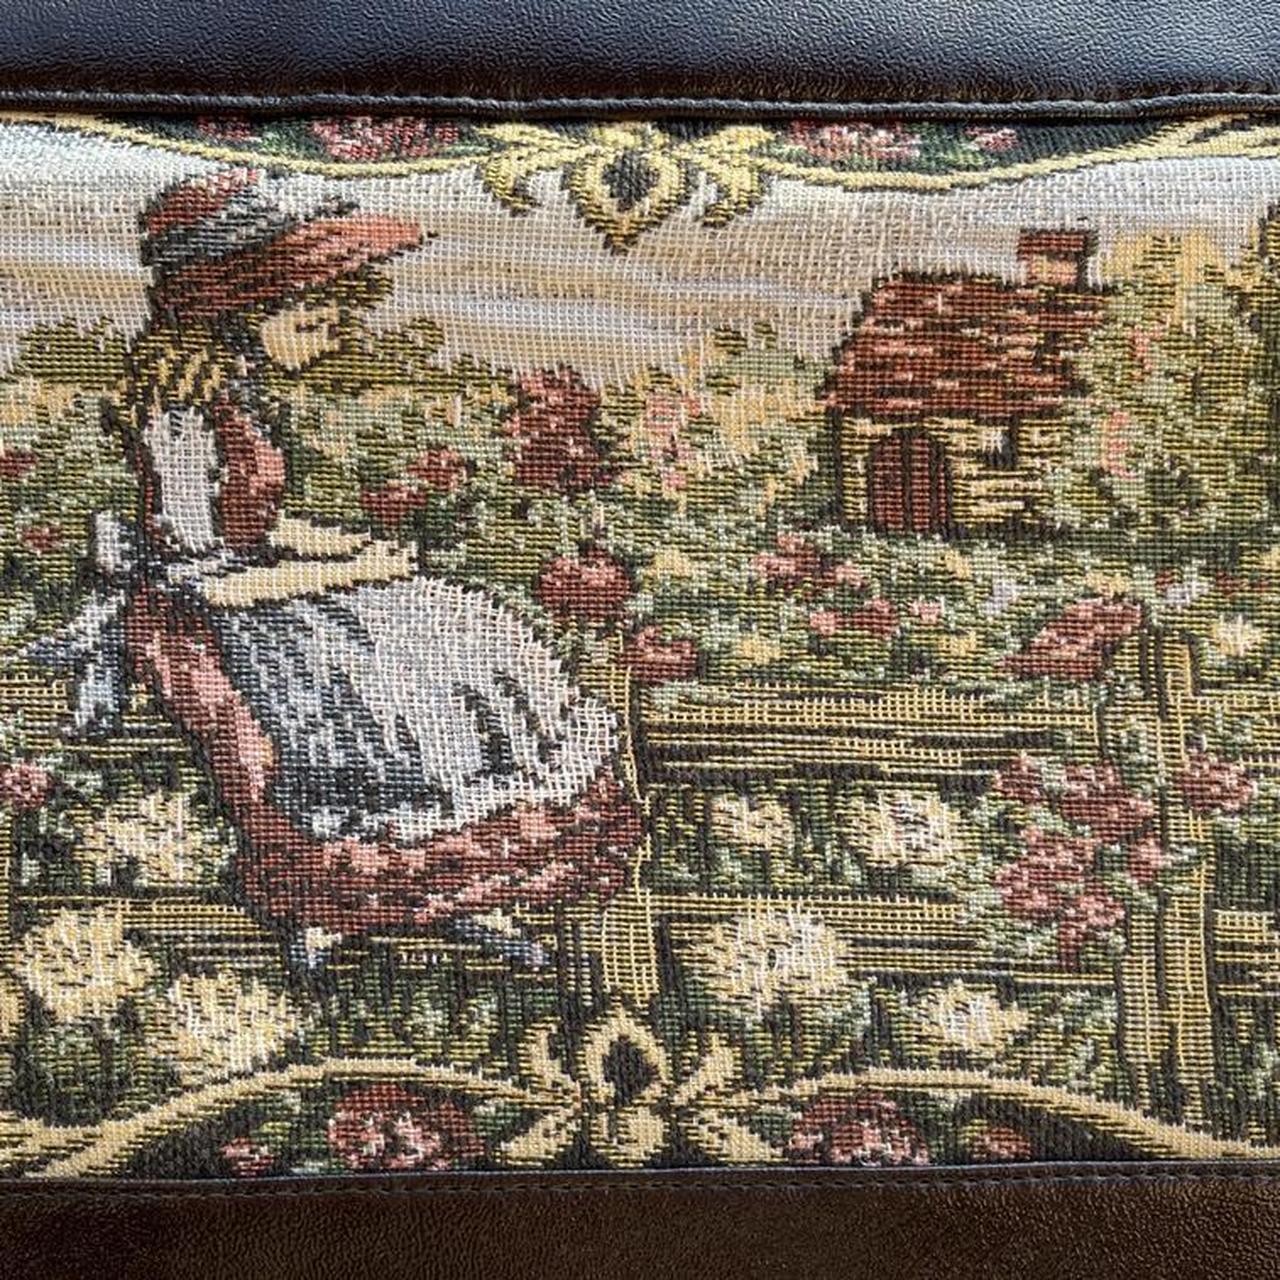 Product Image 2 - Vintage tapestry cottagecore bag clutch